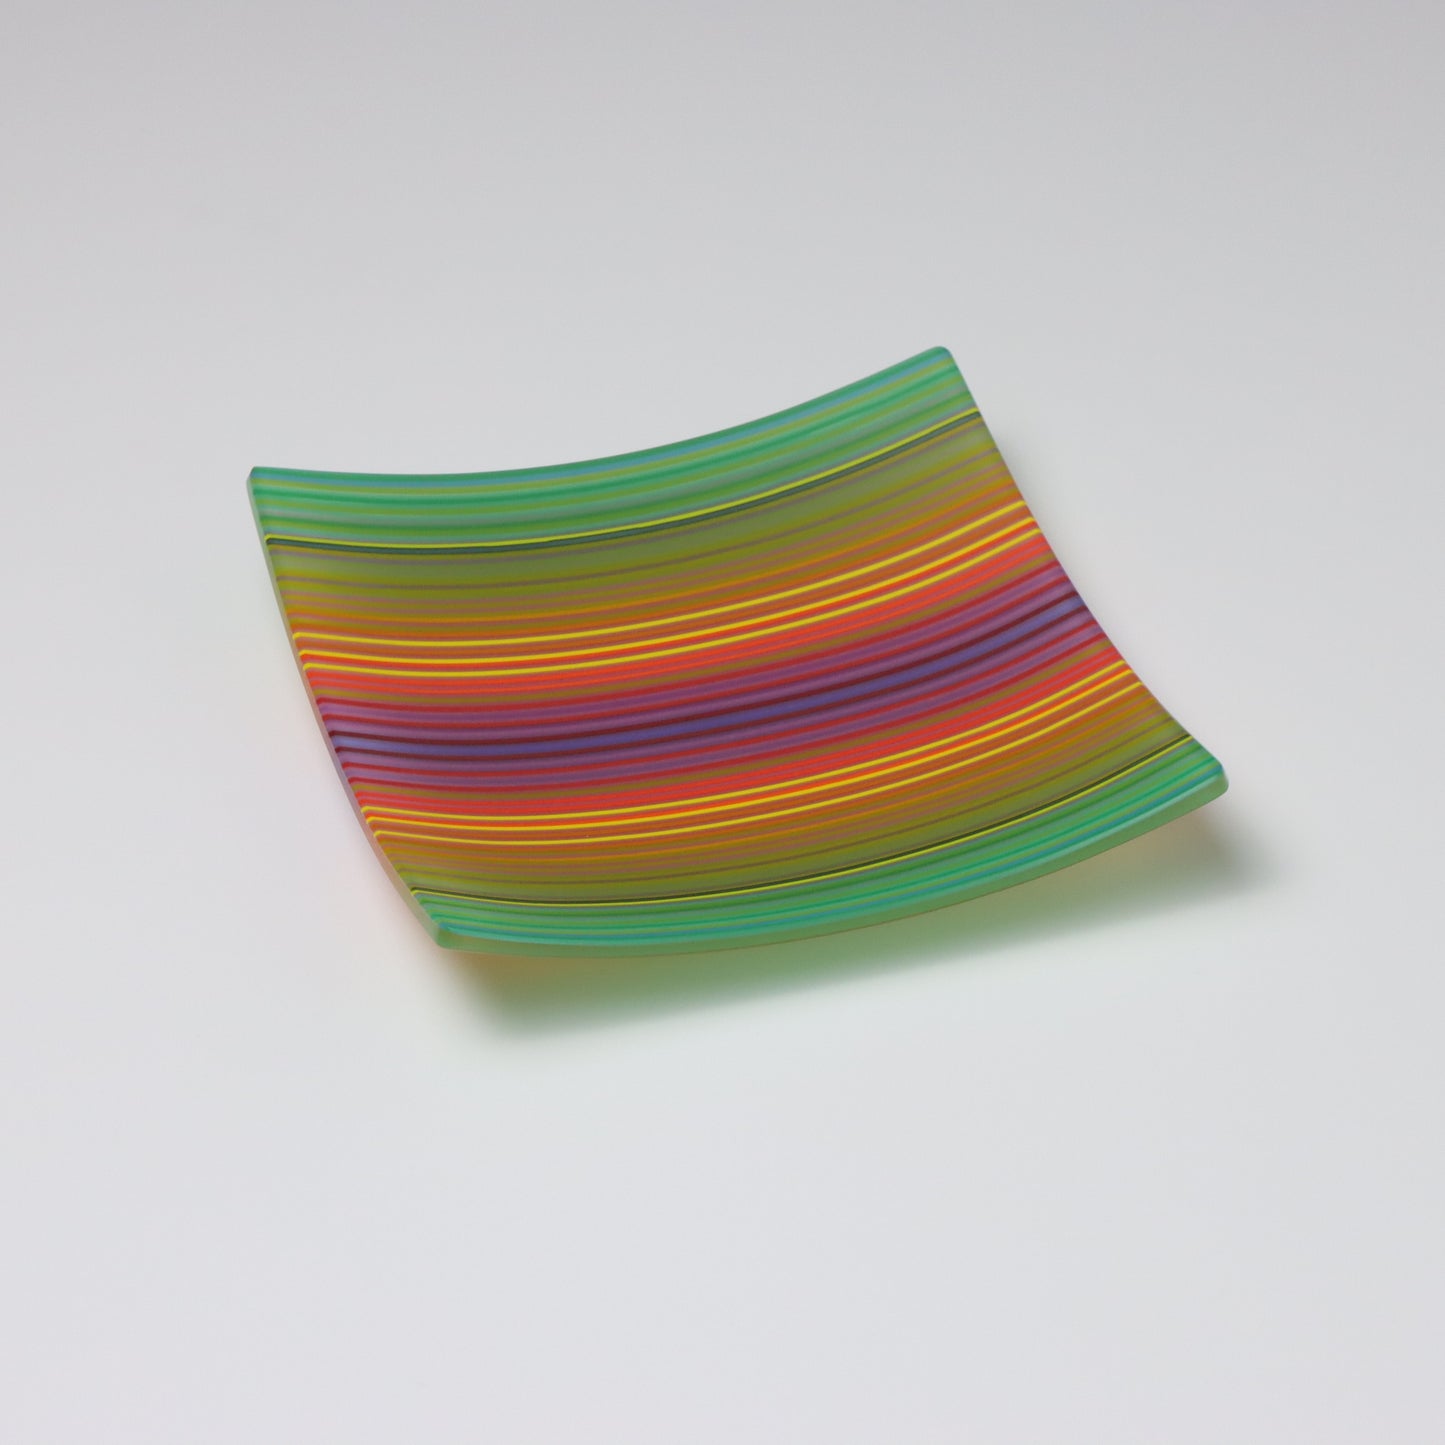 S3321 | Square Shaped ColourWave Glass Plate | Green, Orange, Pink and Purple